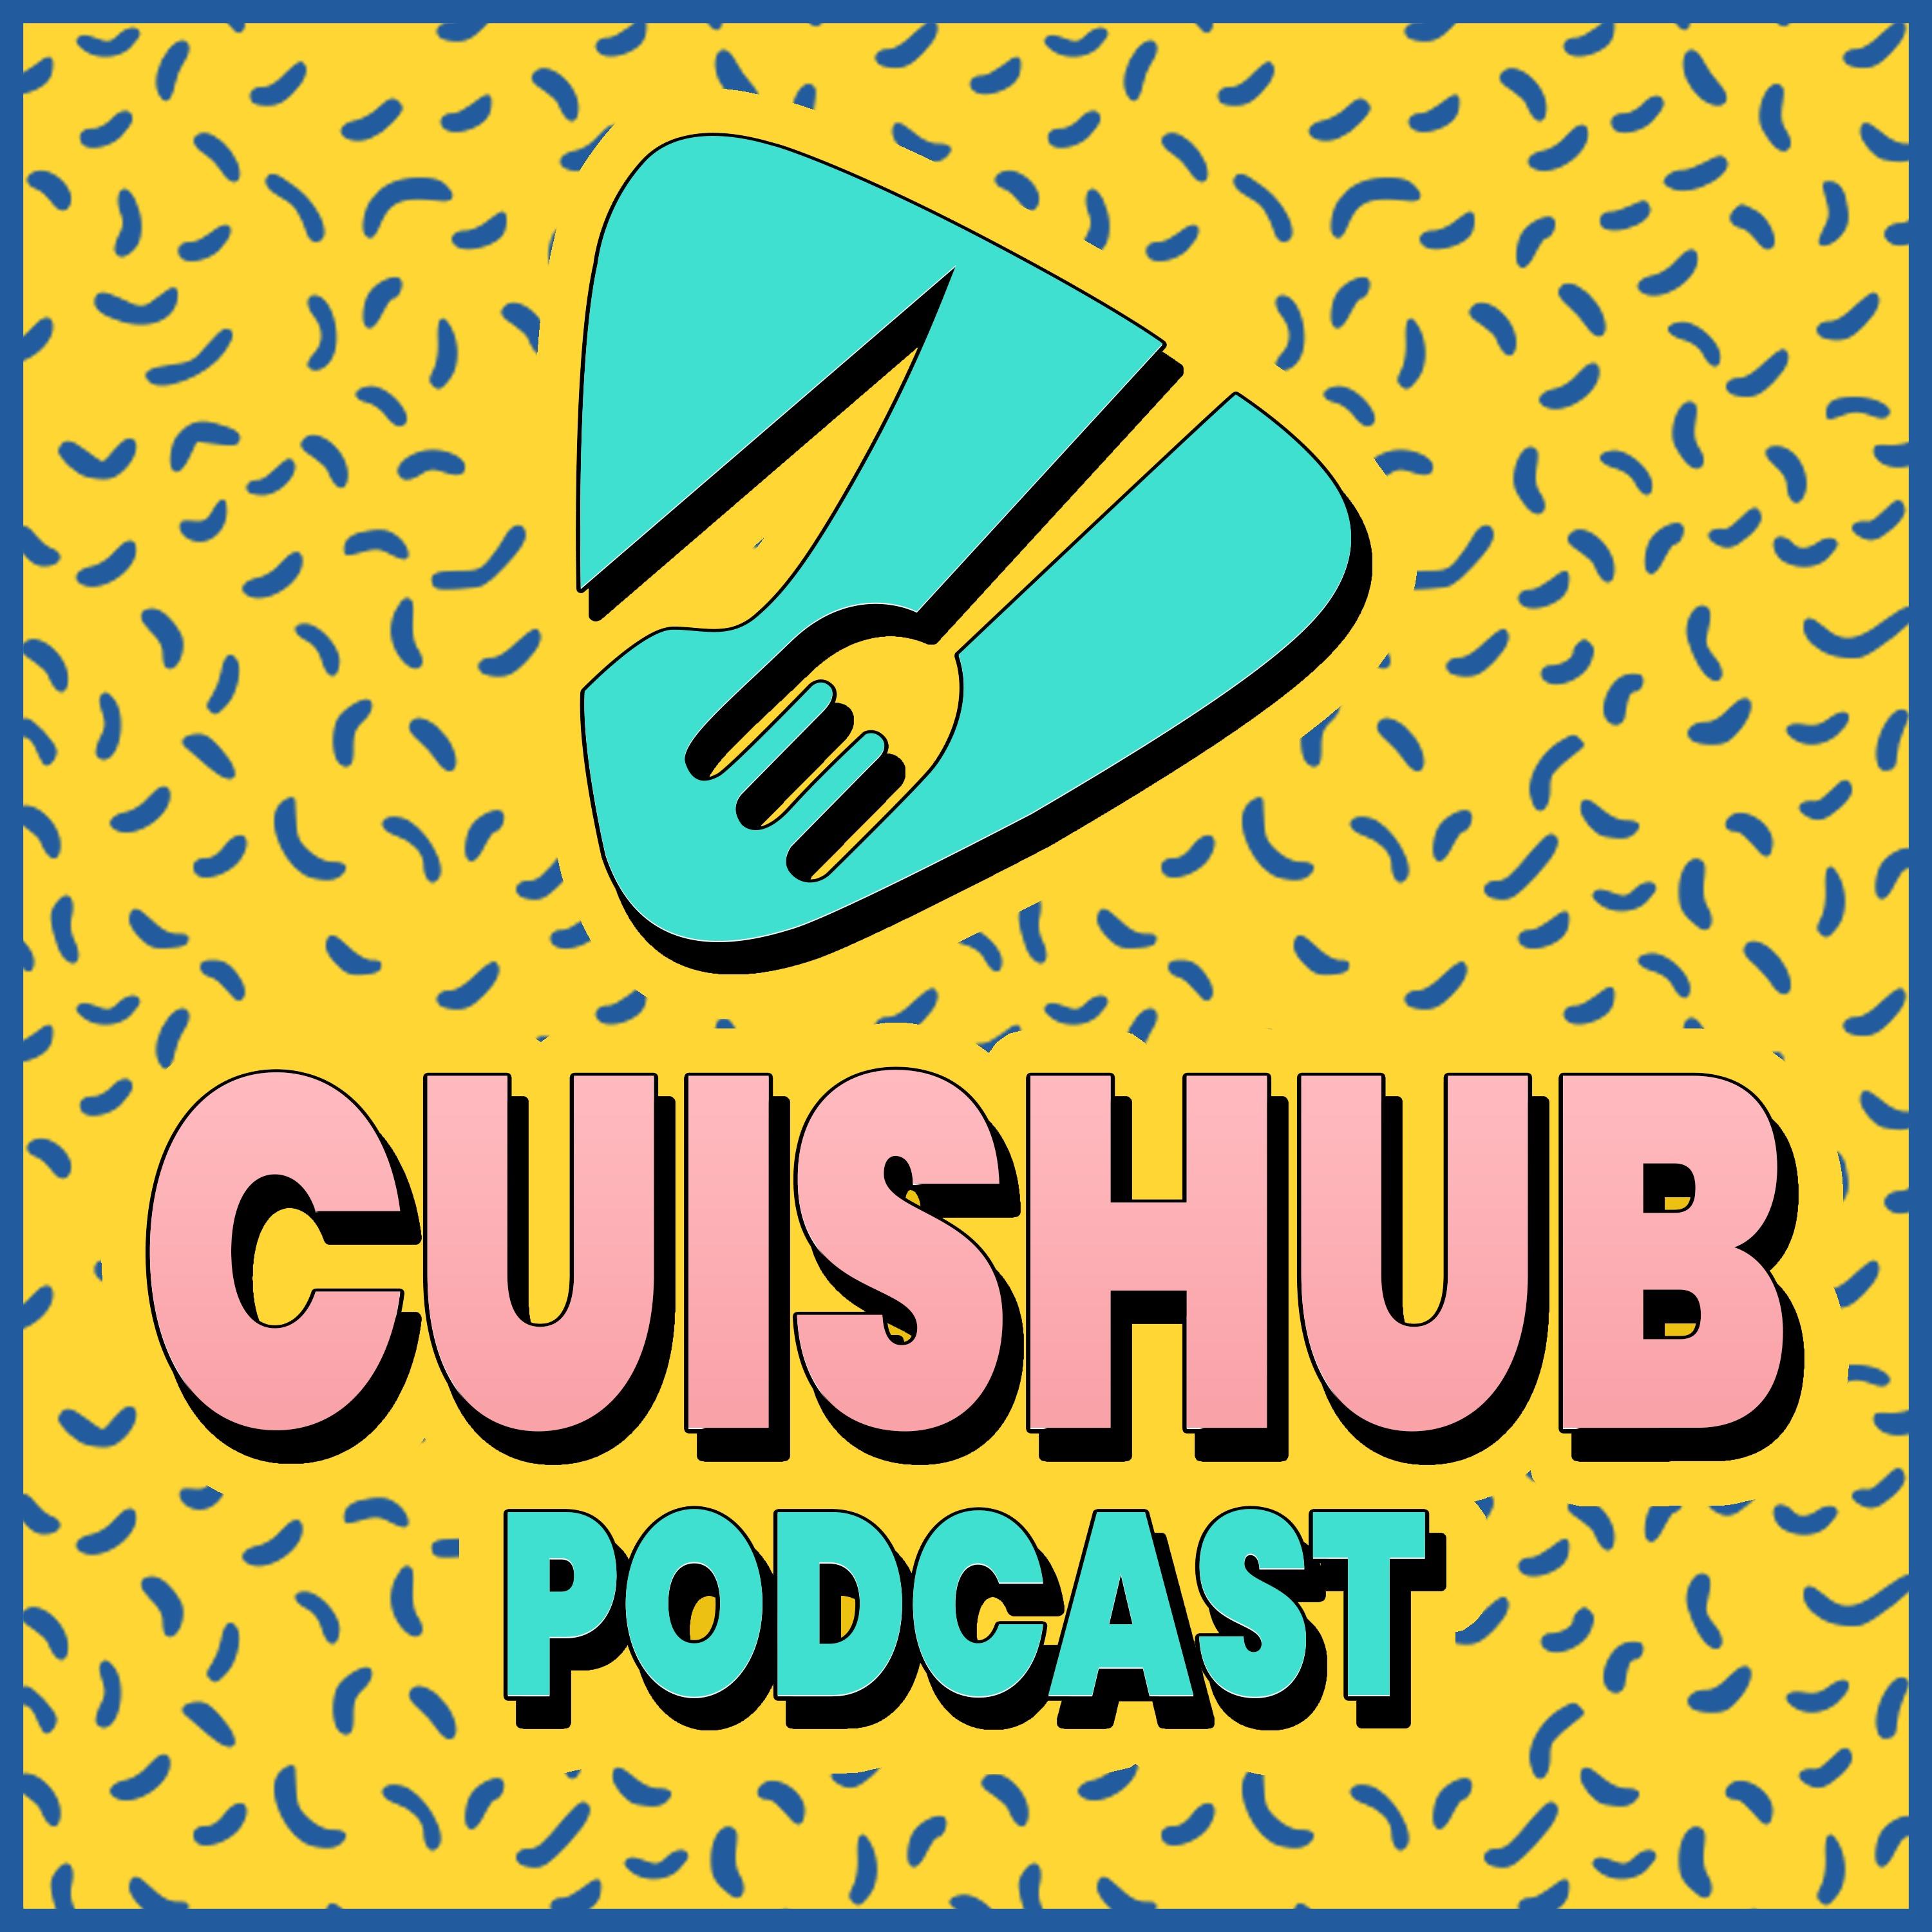 The CuisHub Podcast